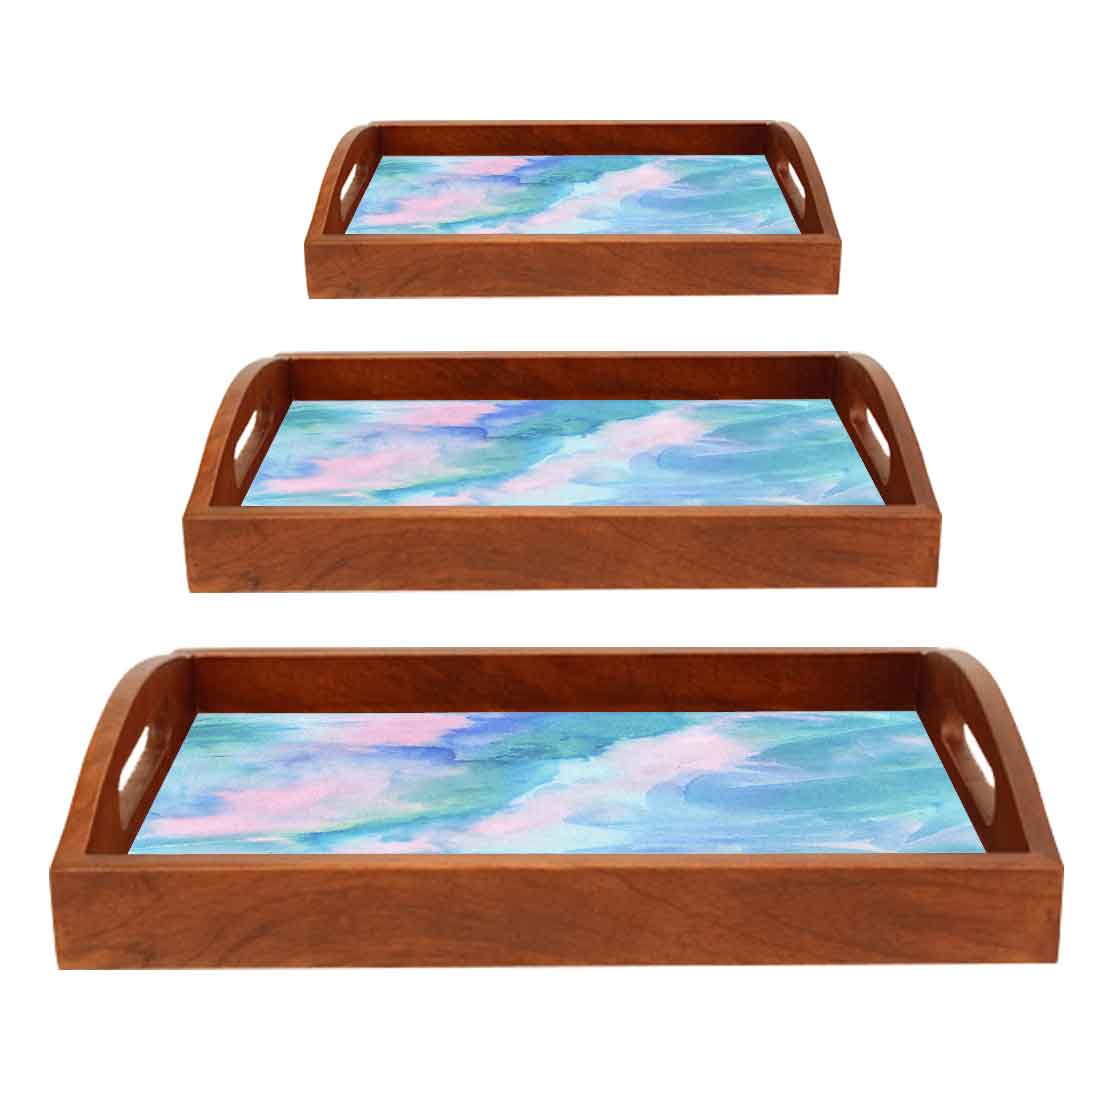 Wooden Serving Tray with Handle Set of 3 Designer Trays